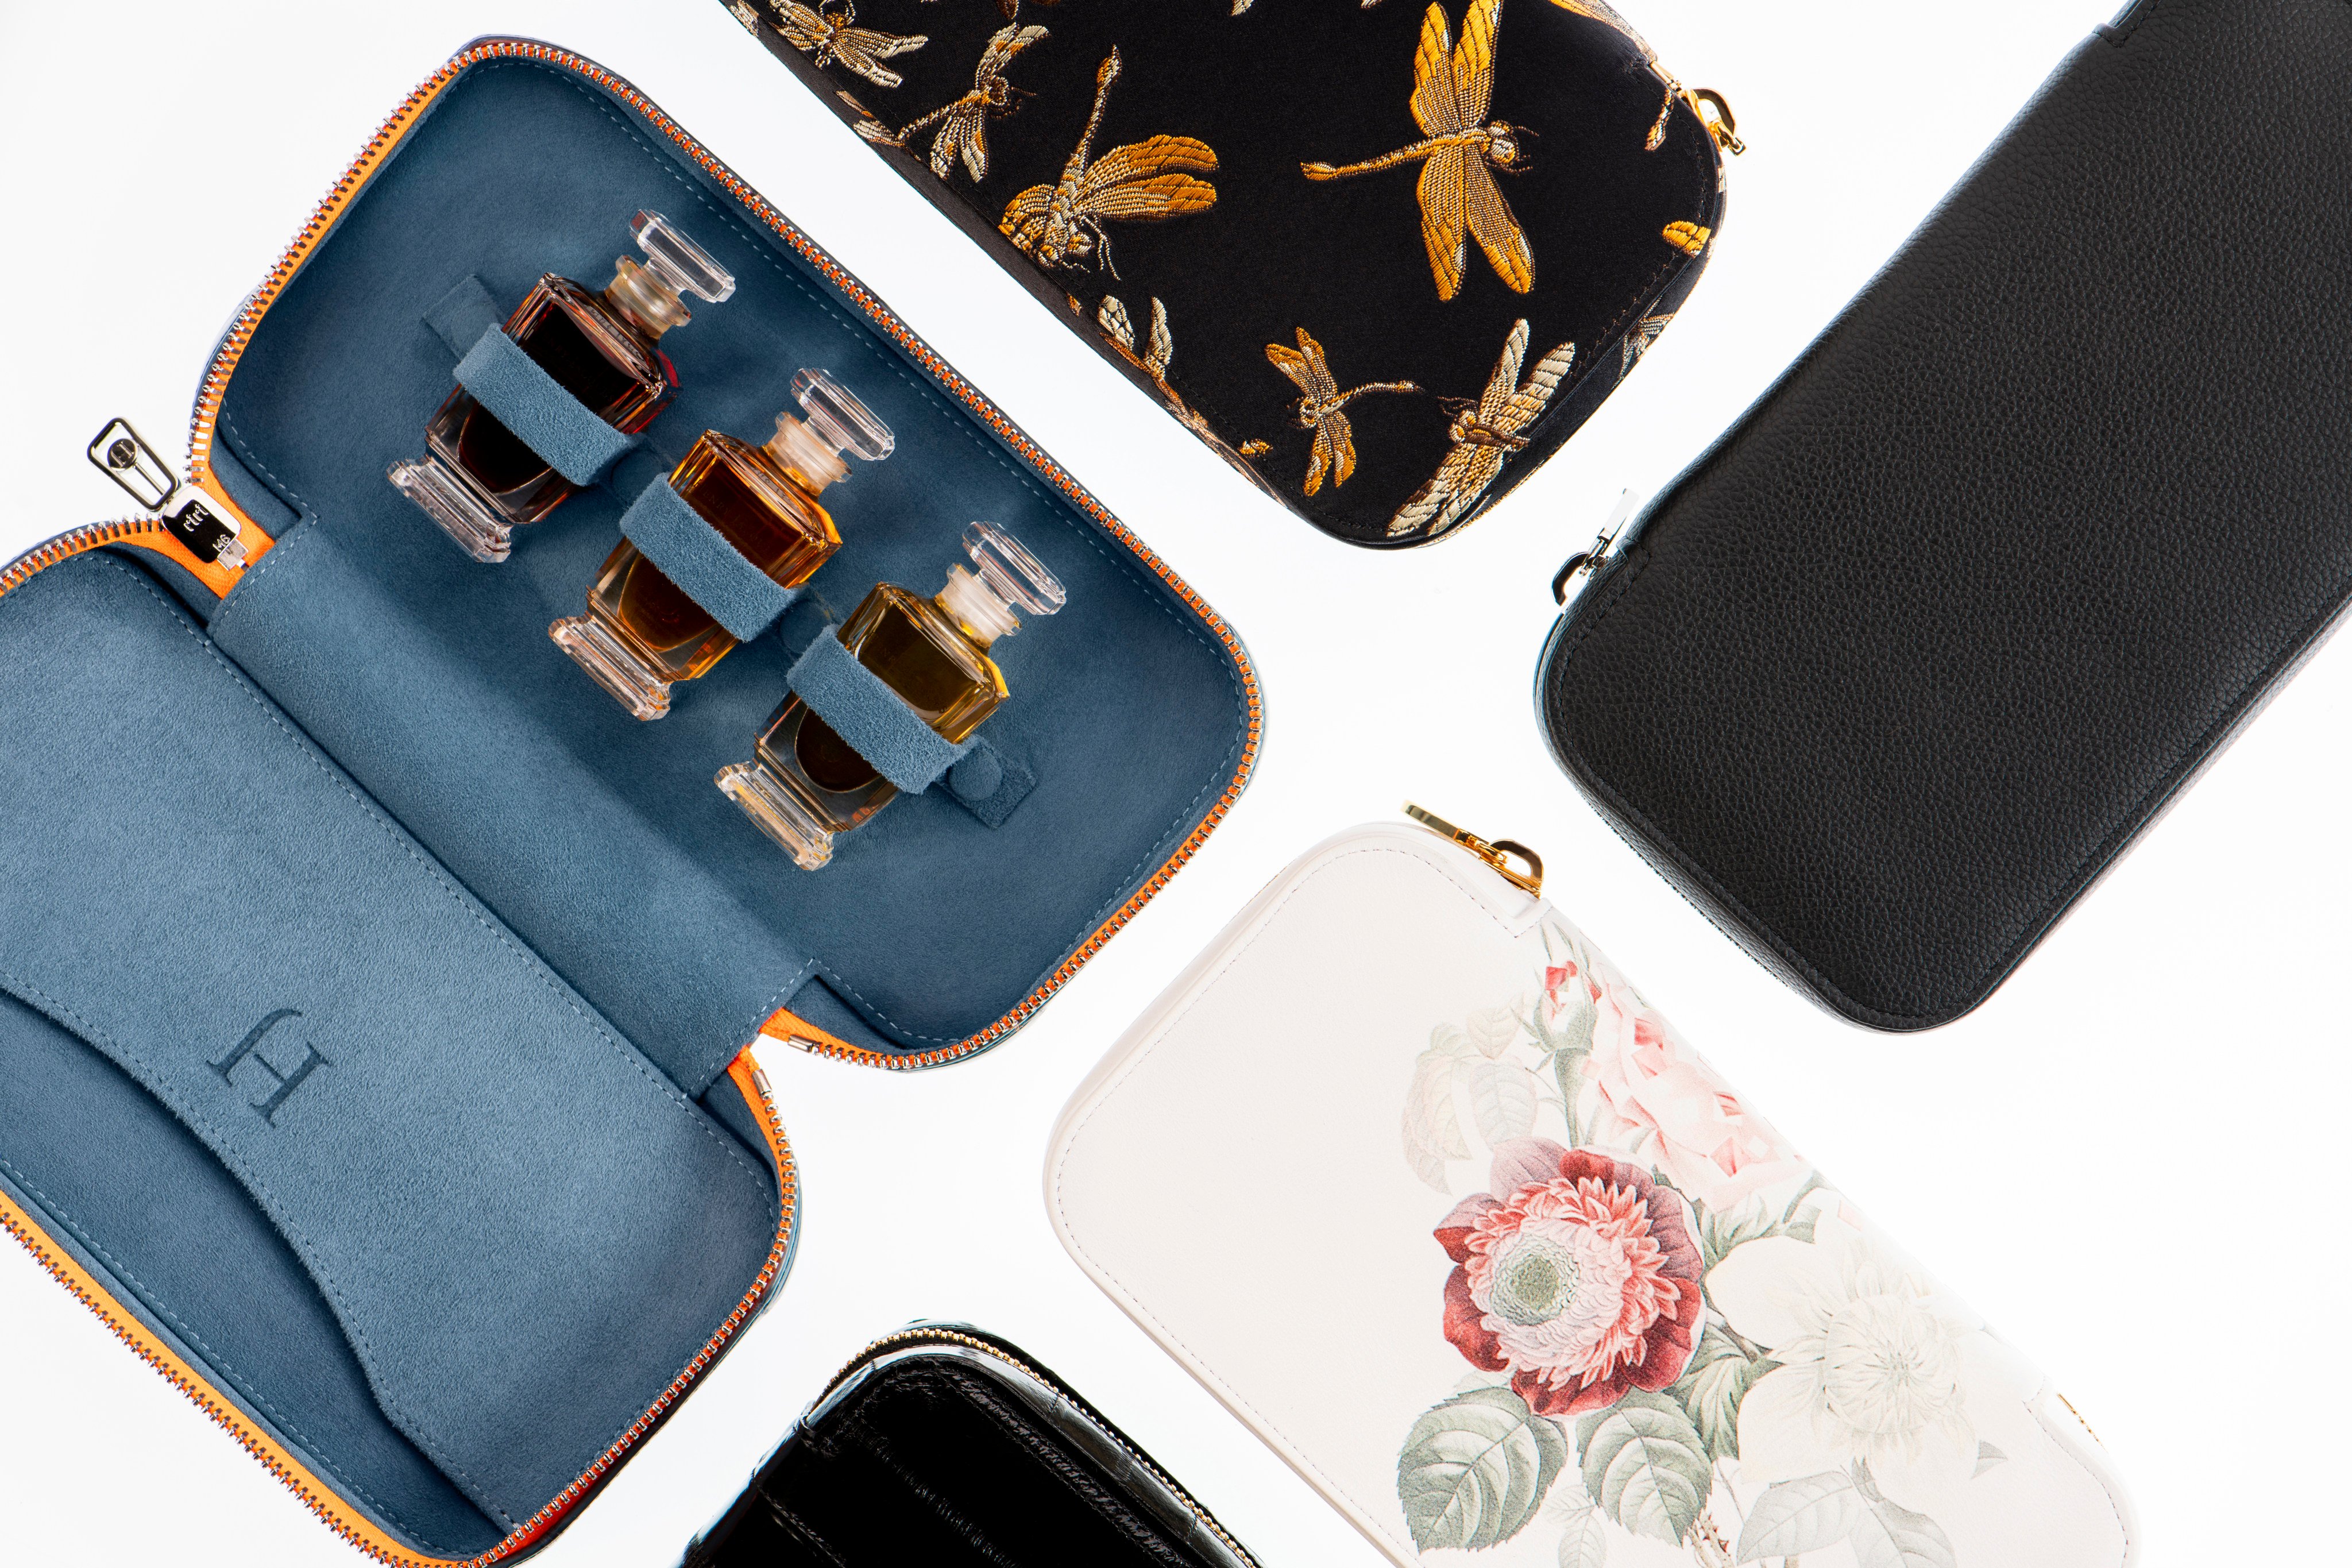 French high perfumer Henry Jacques launched an exquisite signature set of travel accessories, HJ Voyage, which is perfect for those living a jet-setting lifestyle. Photos: Henry Jacques